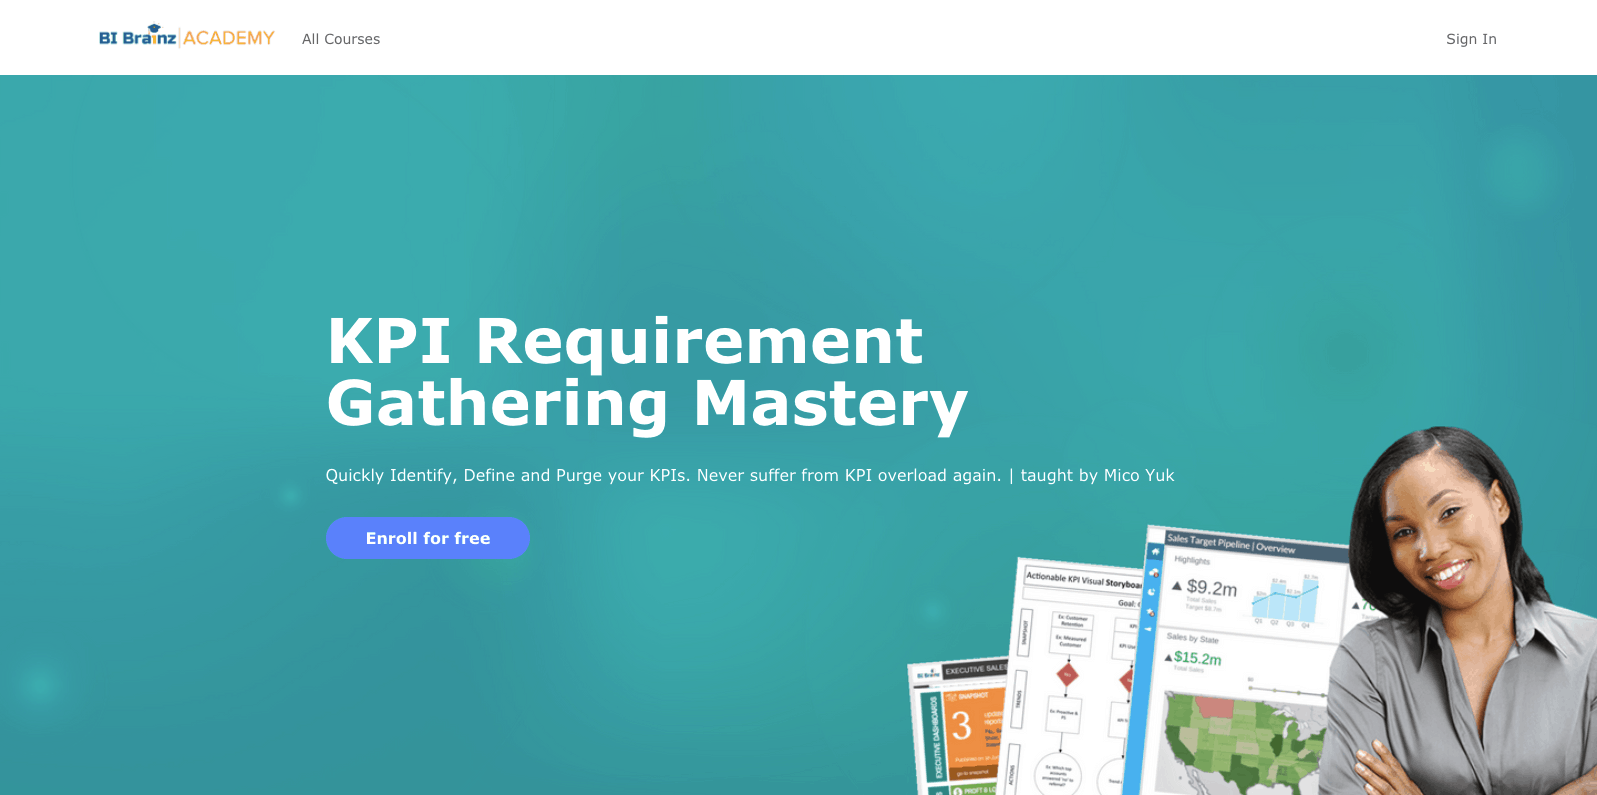 KPI Requirement Gathering Mastery